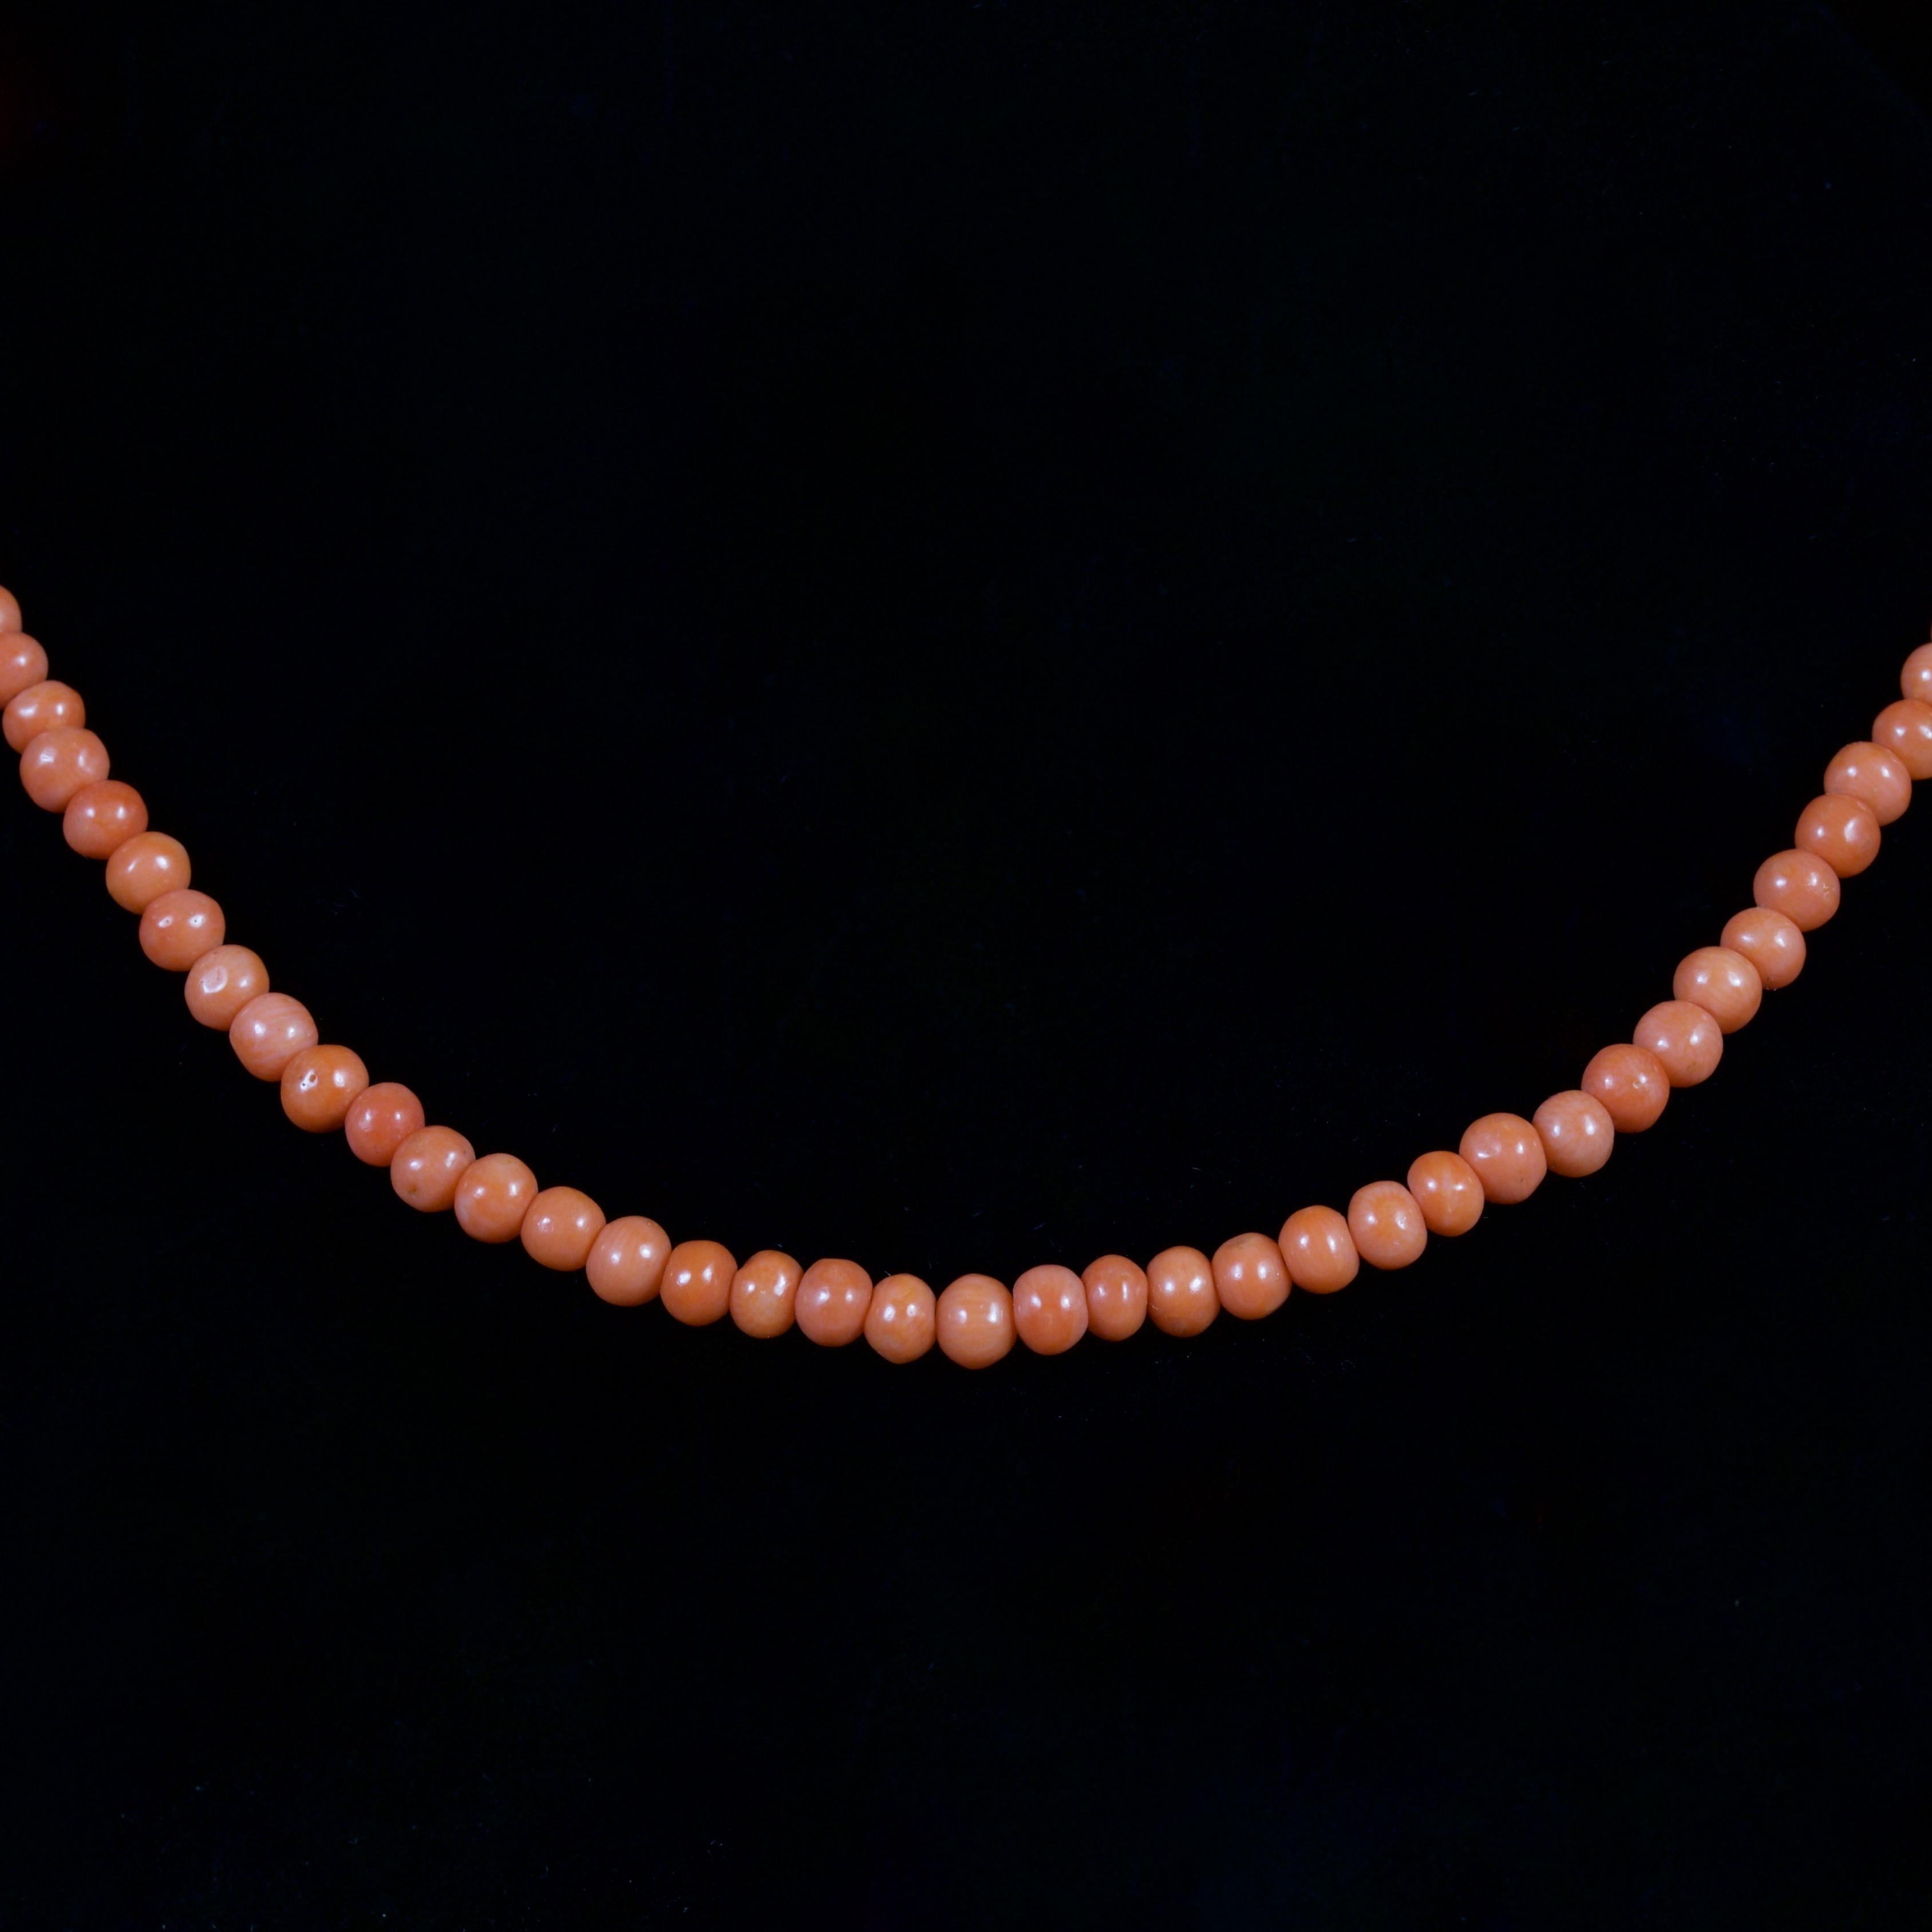 This Victorian Coral Necklace is wonderful, Circa 1900.

The necklace is adorned in beautiful Corals that show a rich orange hue from within.

The necklace is of a small size and would be suitable from a baby or young child.

From the depths of the